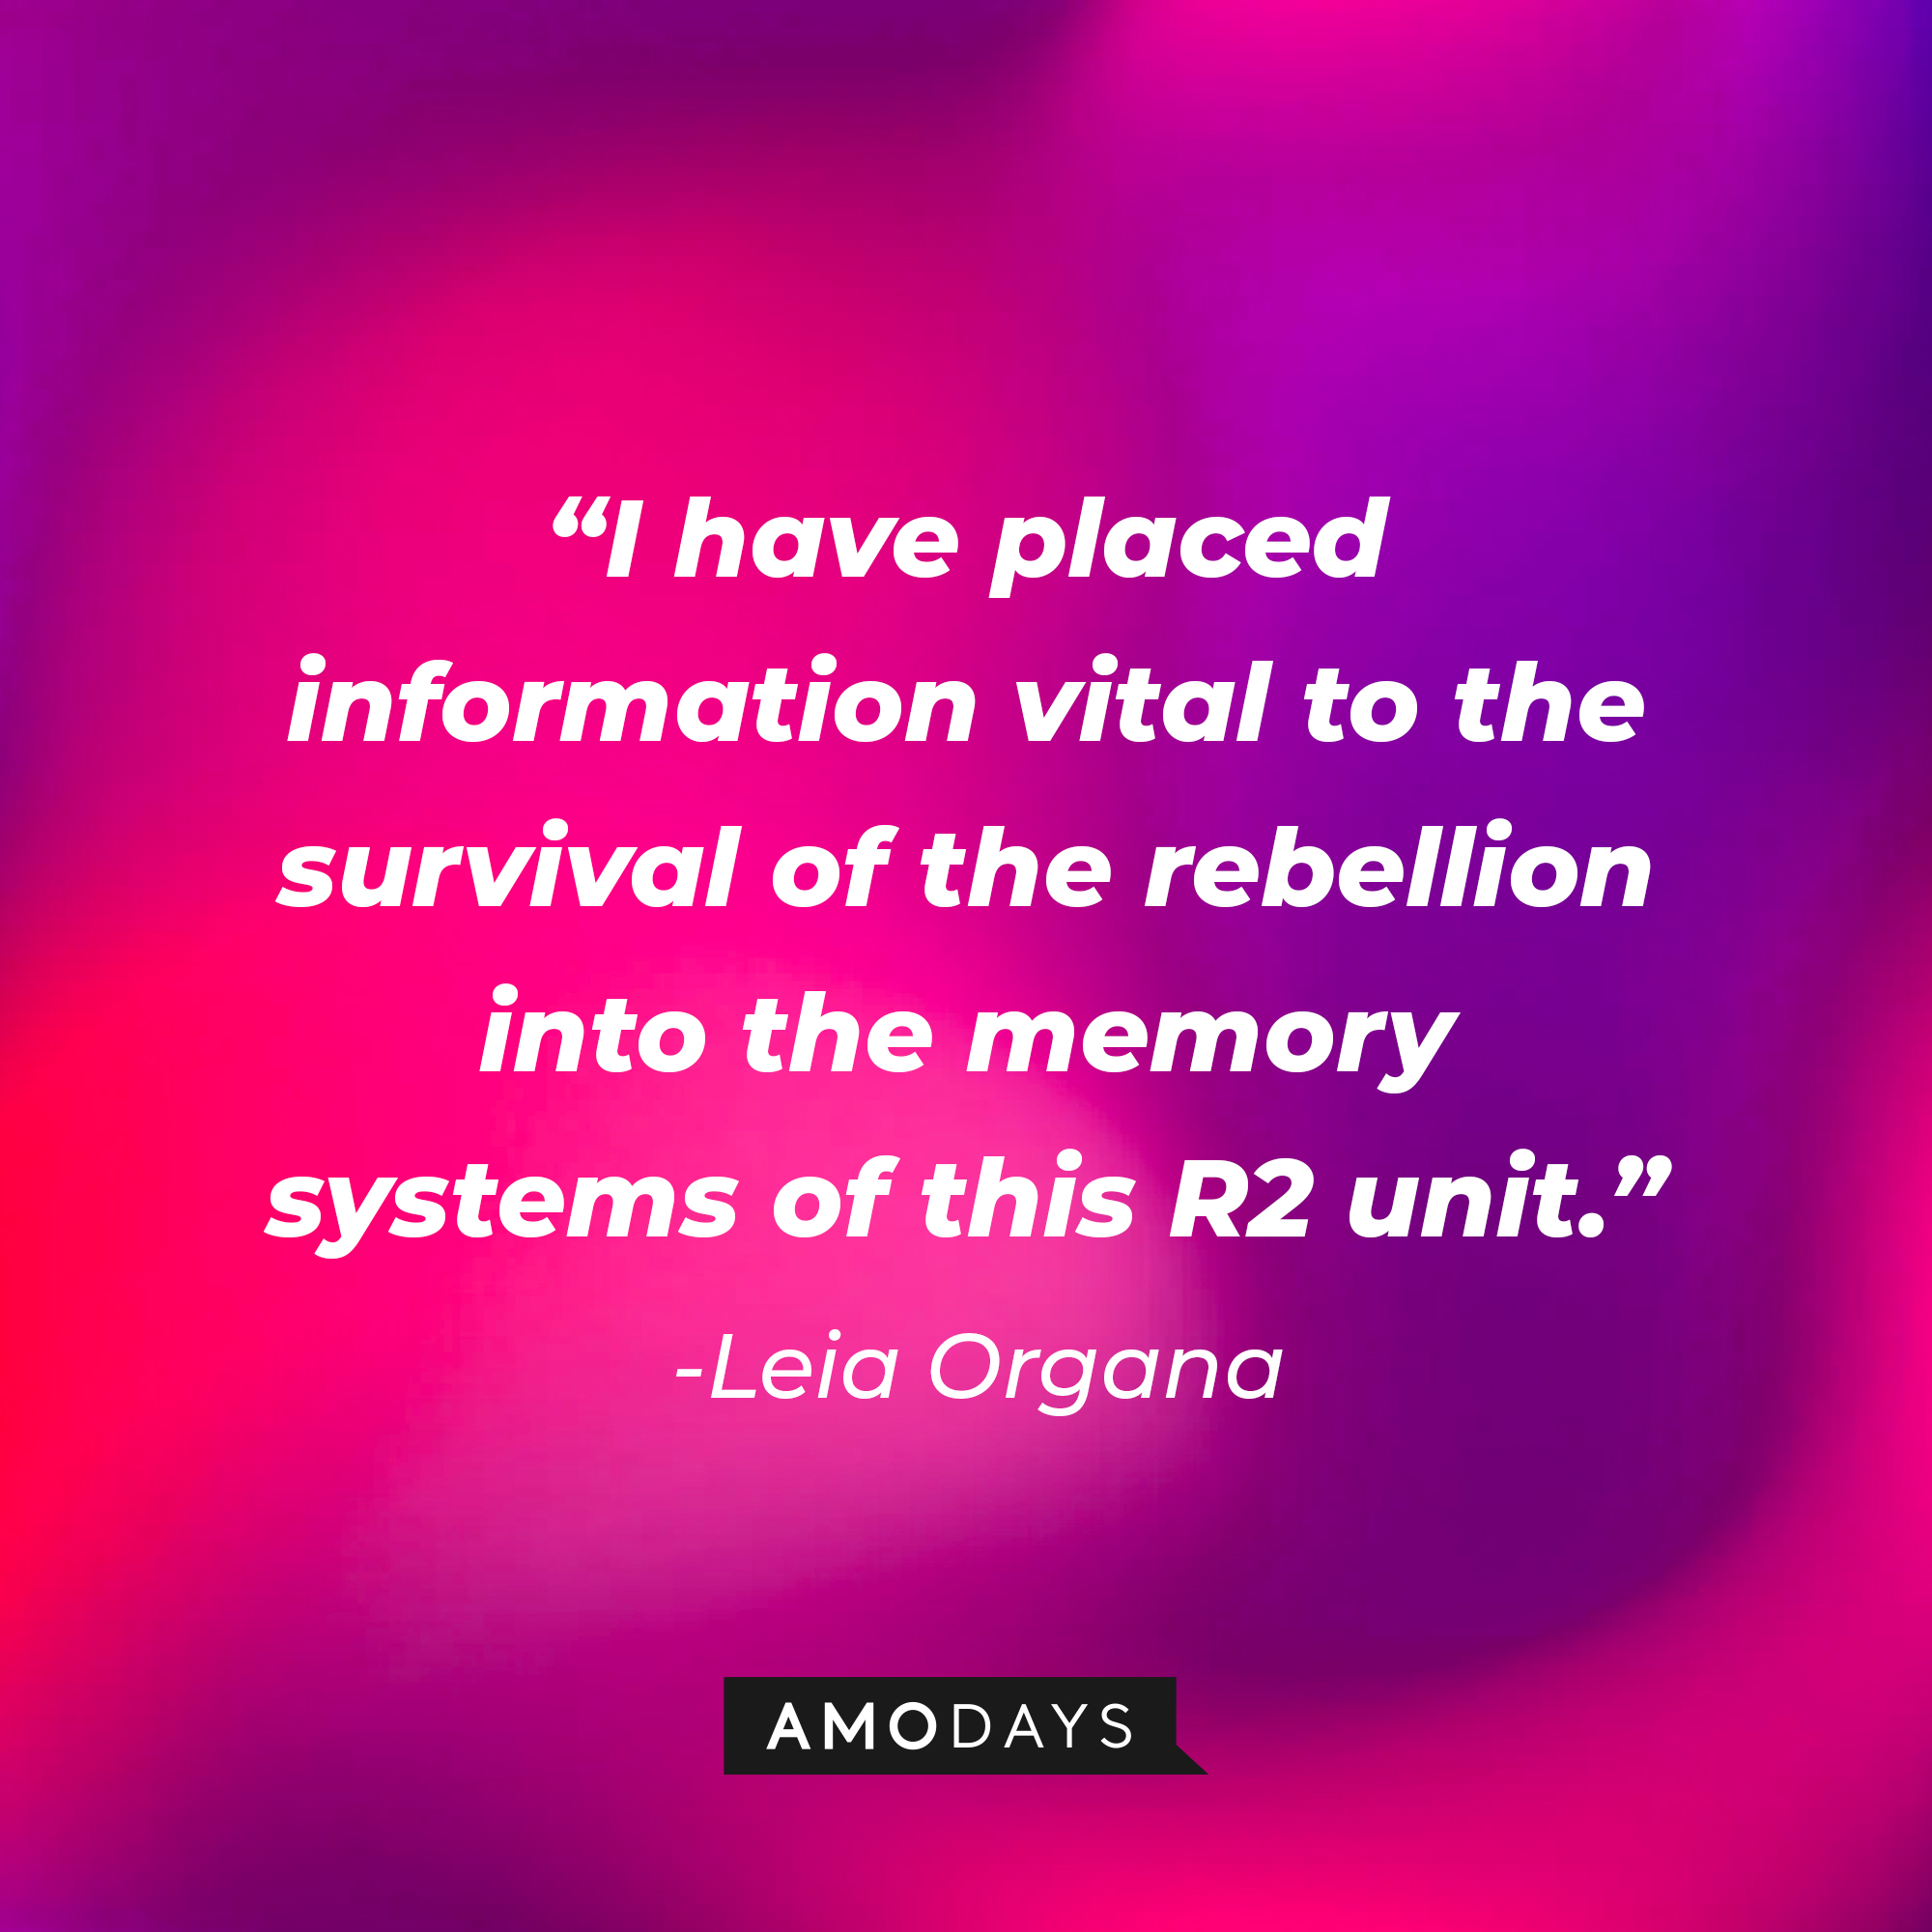 Leia Organa's quote: "I have placed information vital to the survival of the rebellion into the memory systems of this R2 unit." | Source: AmoDays